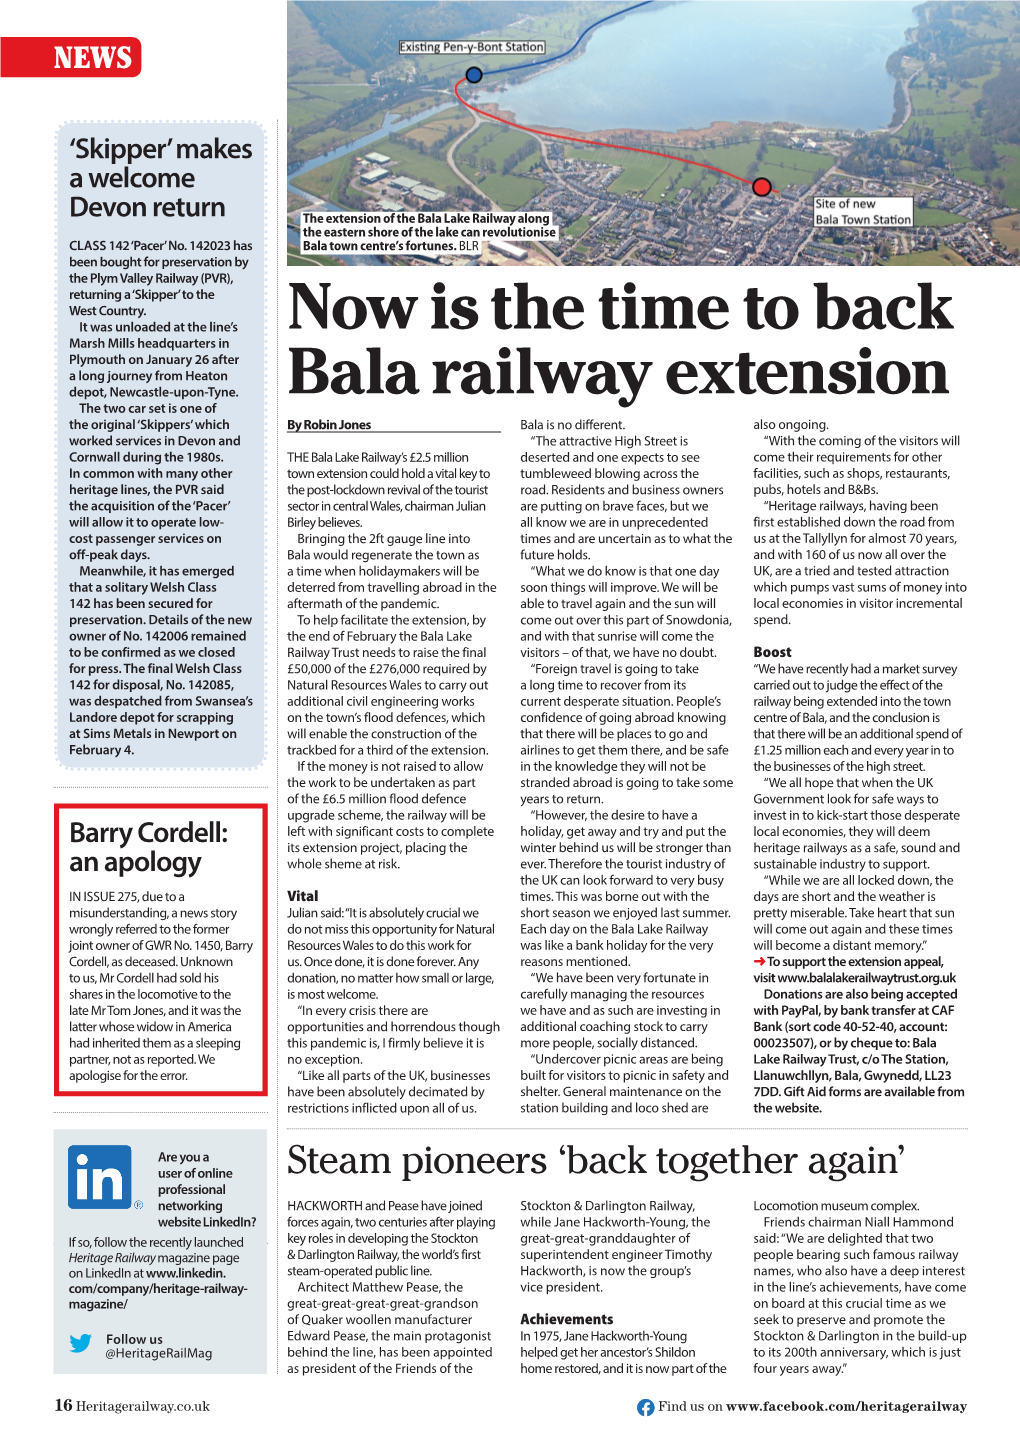 Now Is the Time to Back Bala Railway Extension